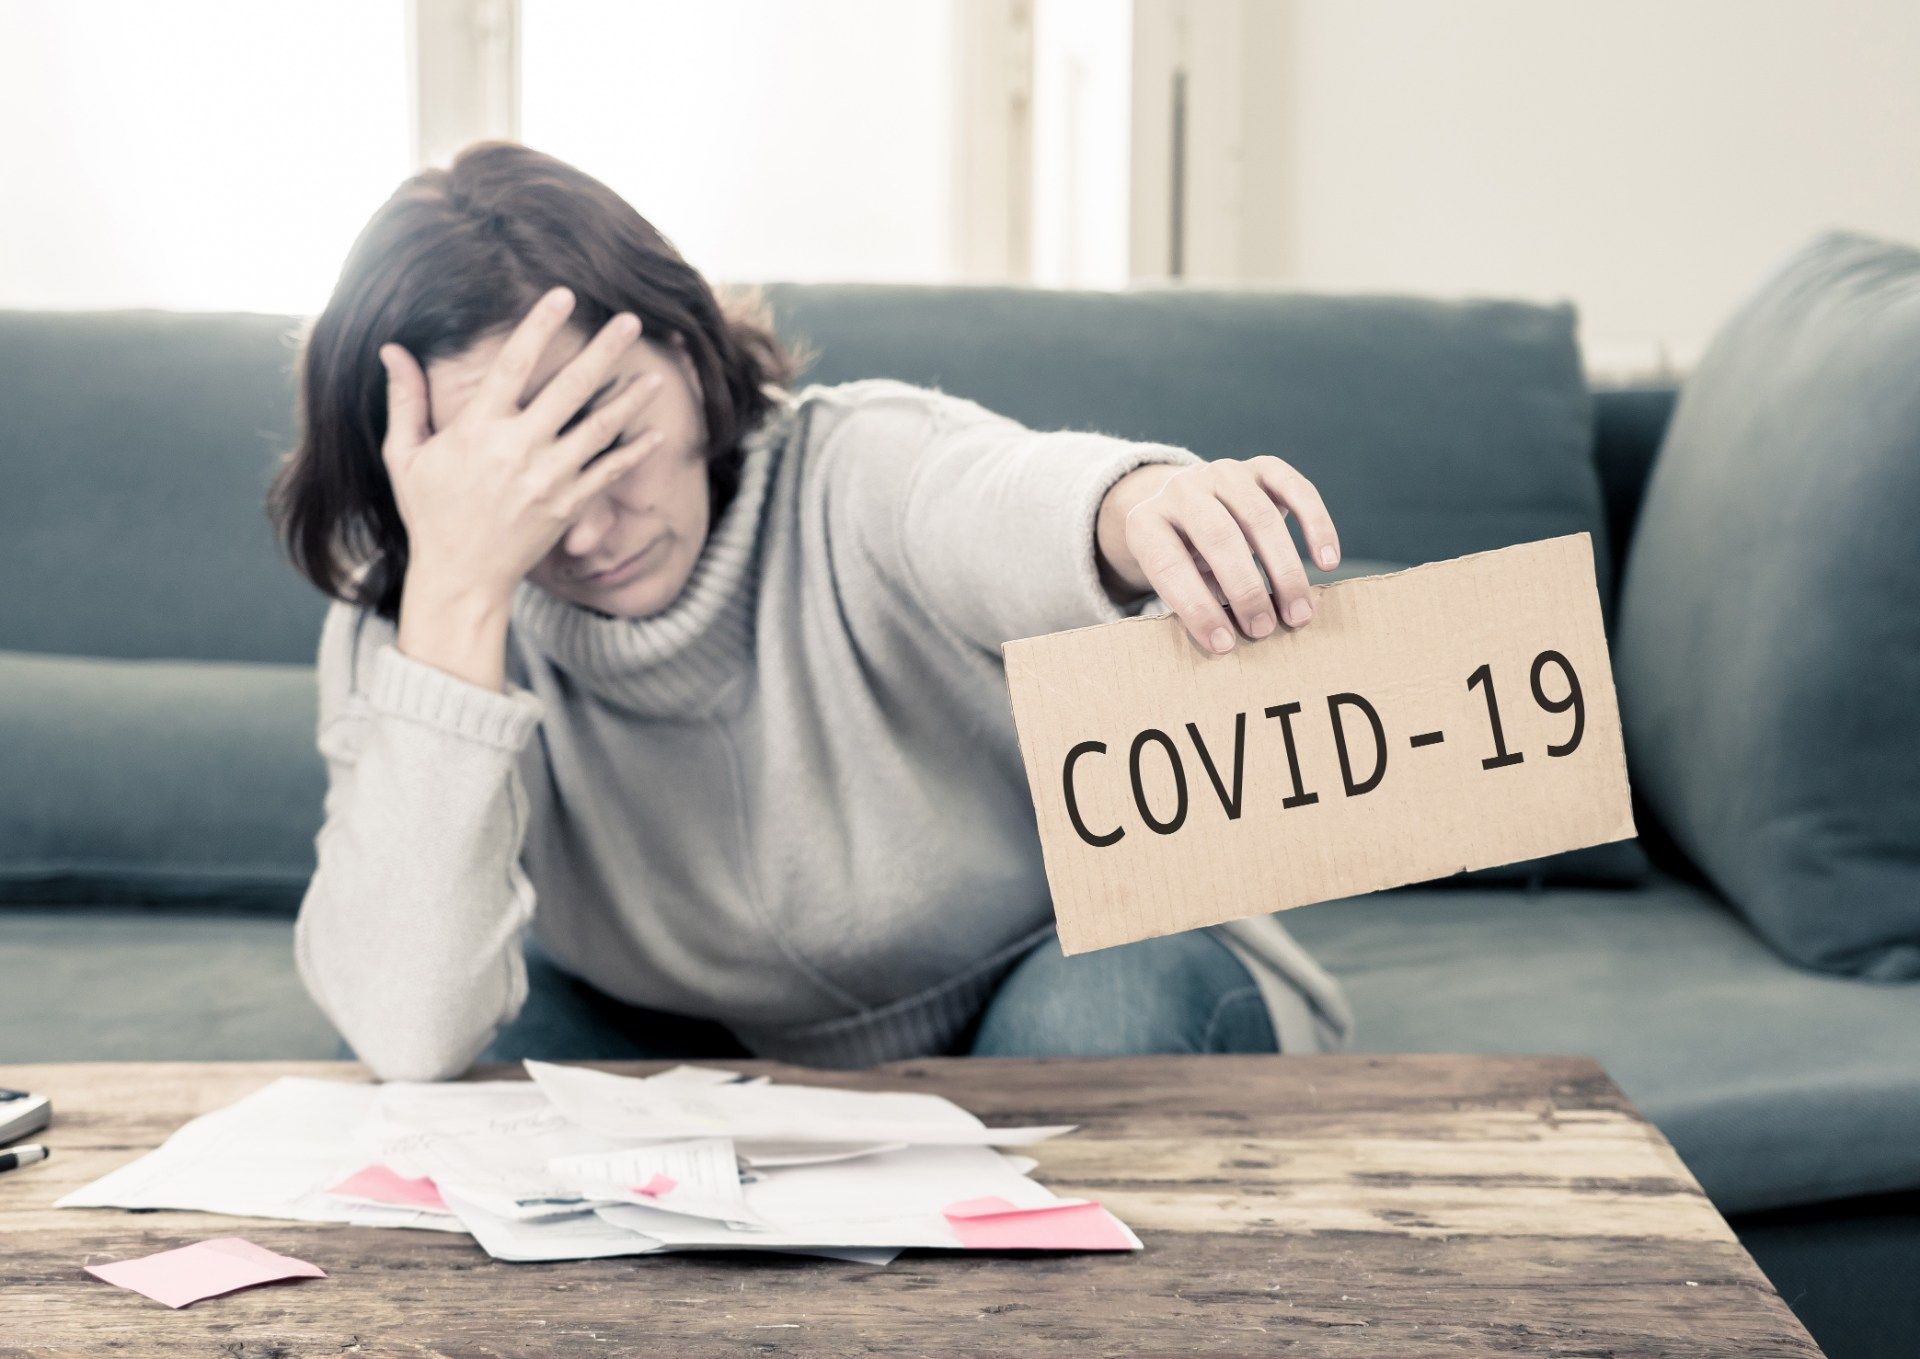 Woman stressed over finances sits on her sofa while holding out a sign that says "COVID-19" - payment deferrals